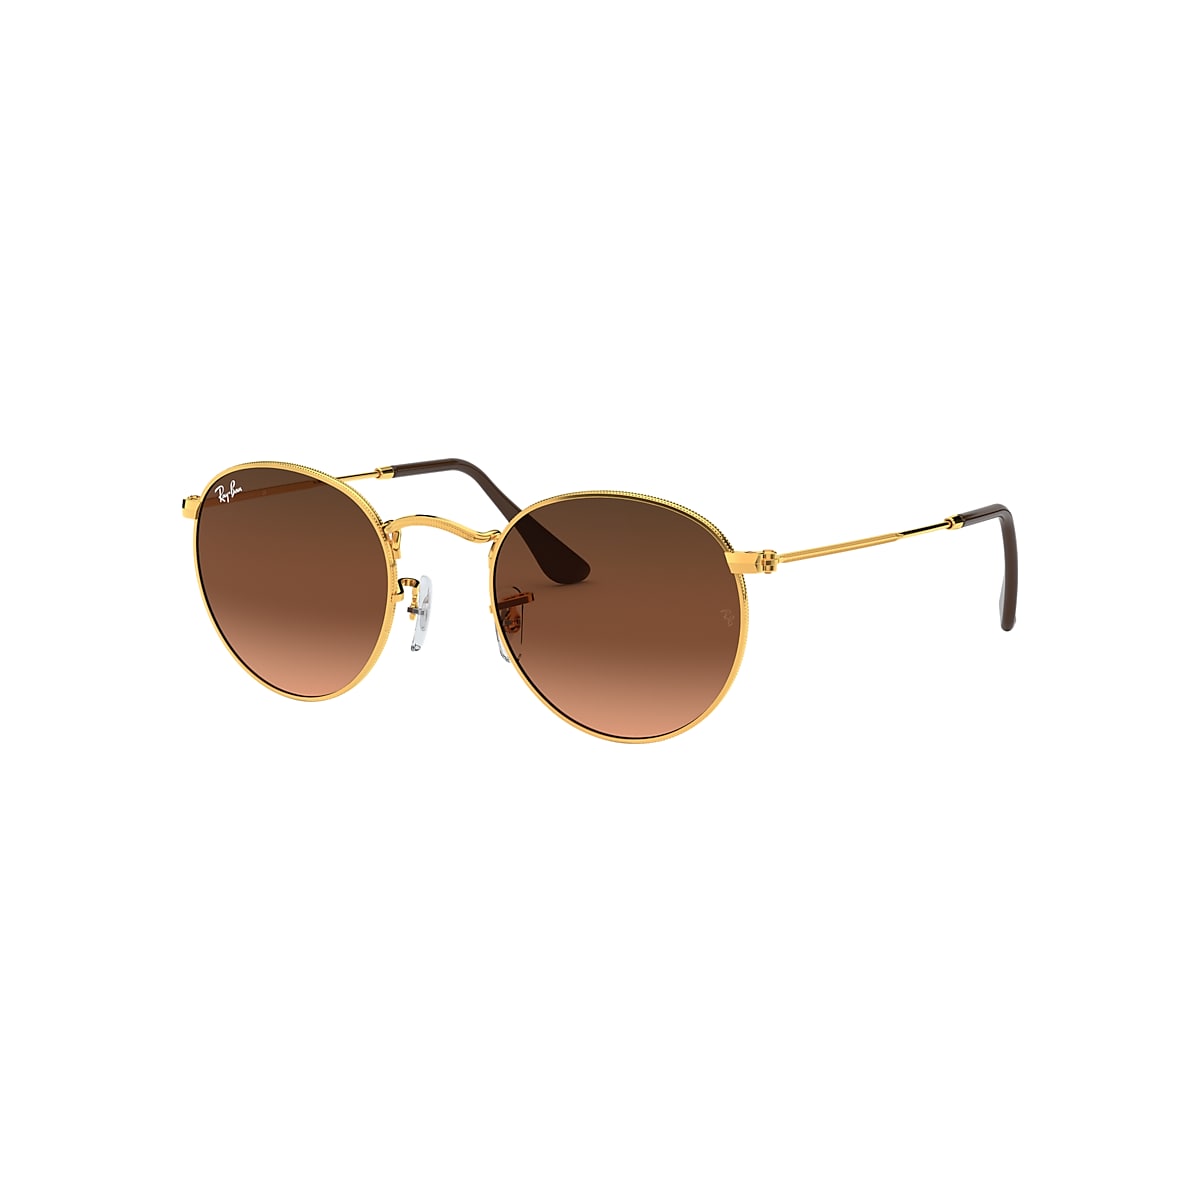 symmetri øst moral ROUND METAL Sunglasses in Light Bronze and Pink/Brown - RB3447 | Ray-Ban® US